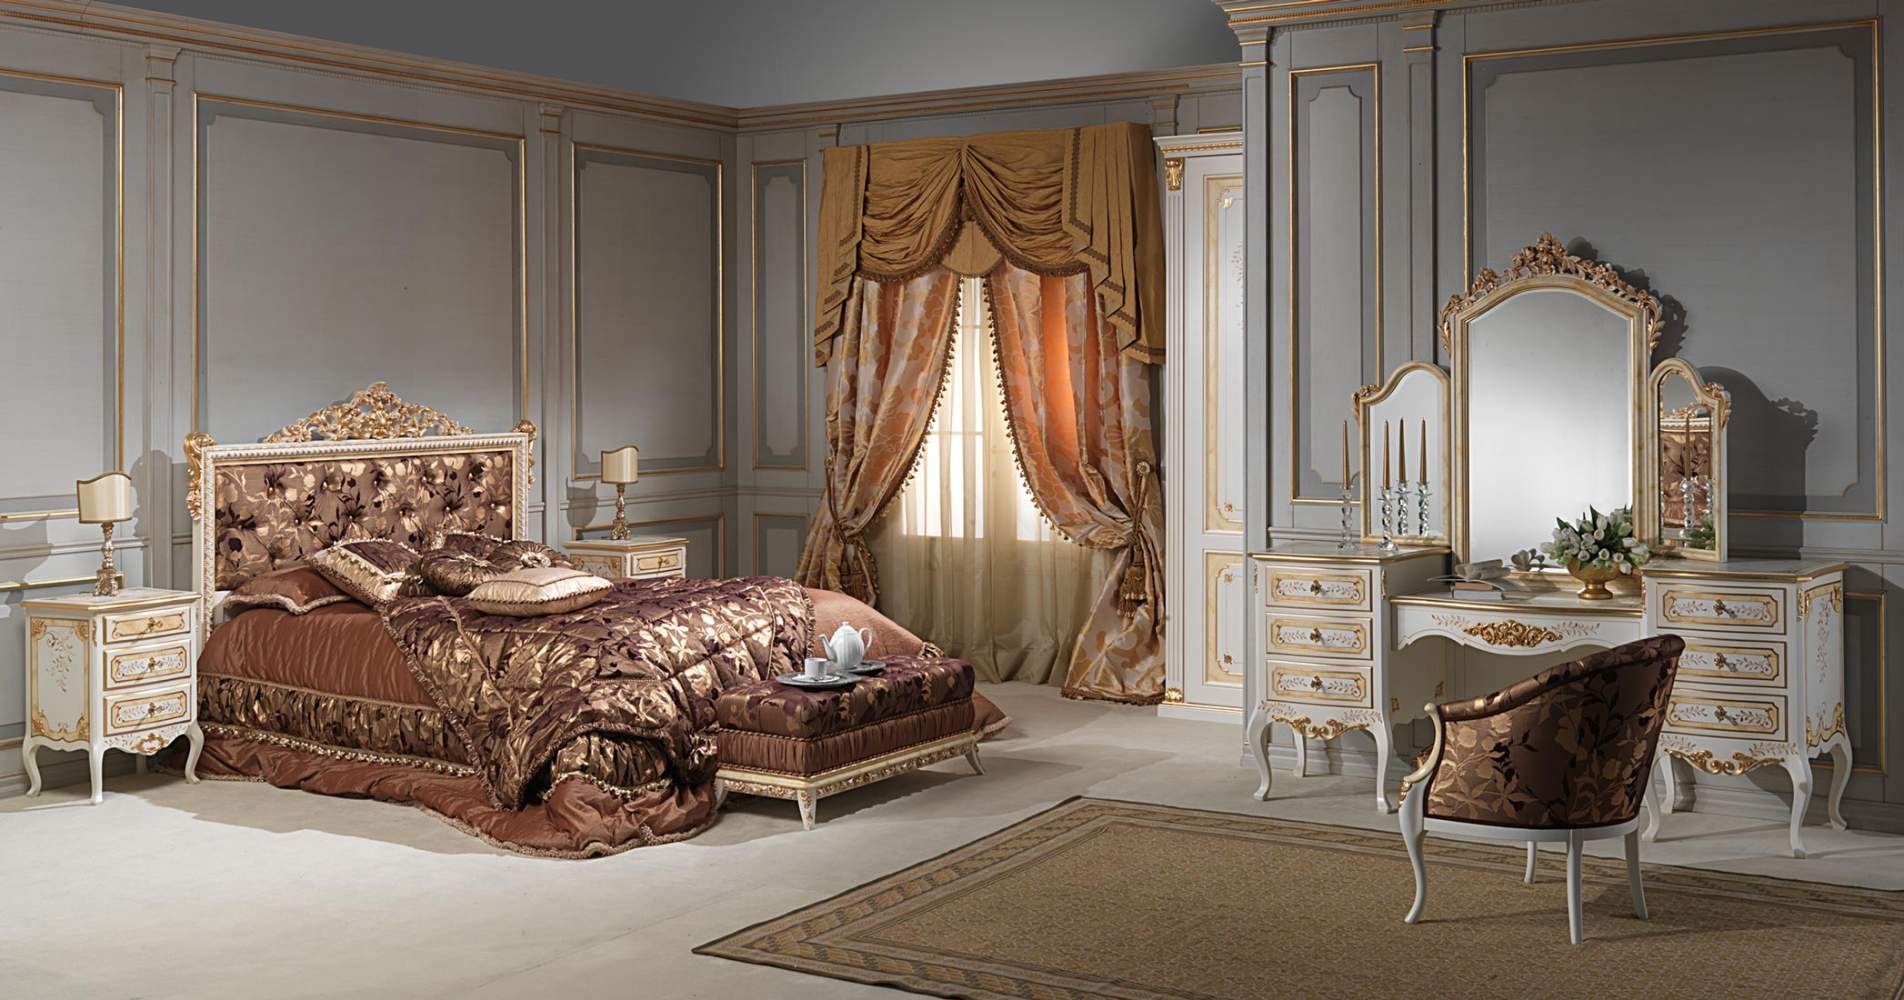 French-baroque-bedroom of the collection art. 2018, with carvings and decorations made by hand